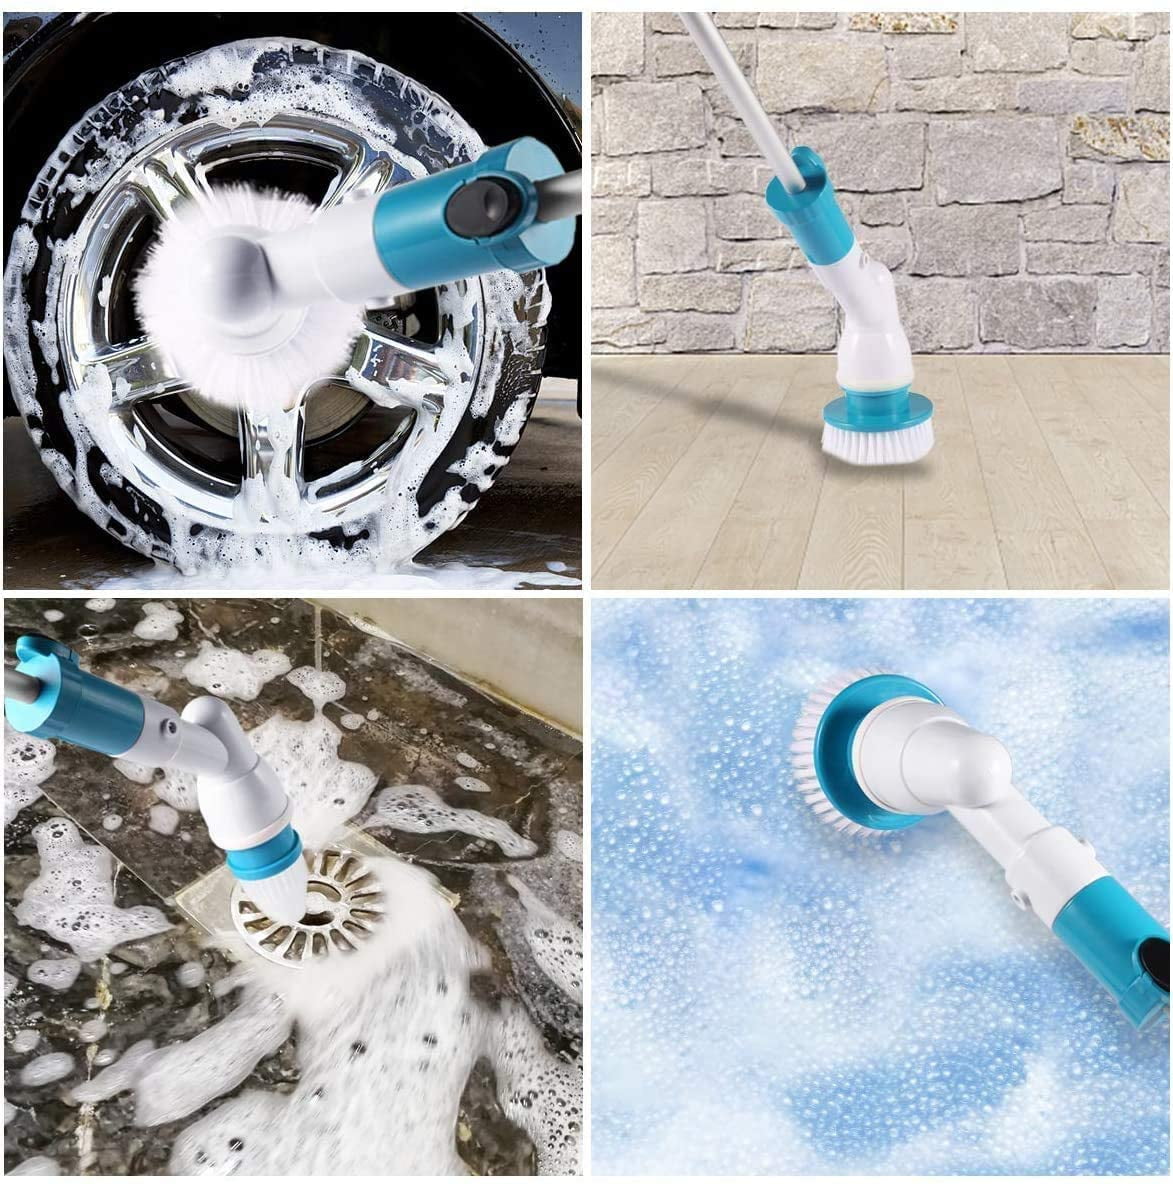 Dropship Electric Spin Scrubber Turbo Scrub Cleaning Brush Cordless  Chargeable Bathroom Cleaner With Extensio to Sell Online at a Lower Price